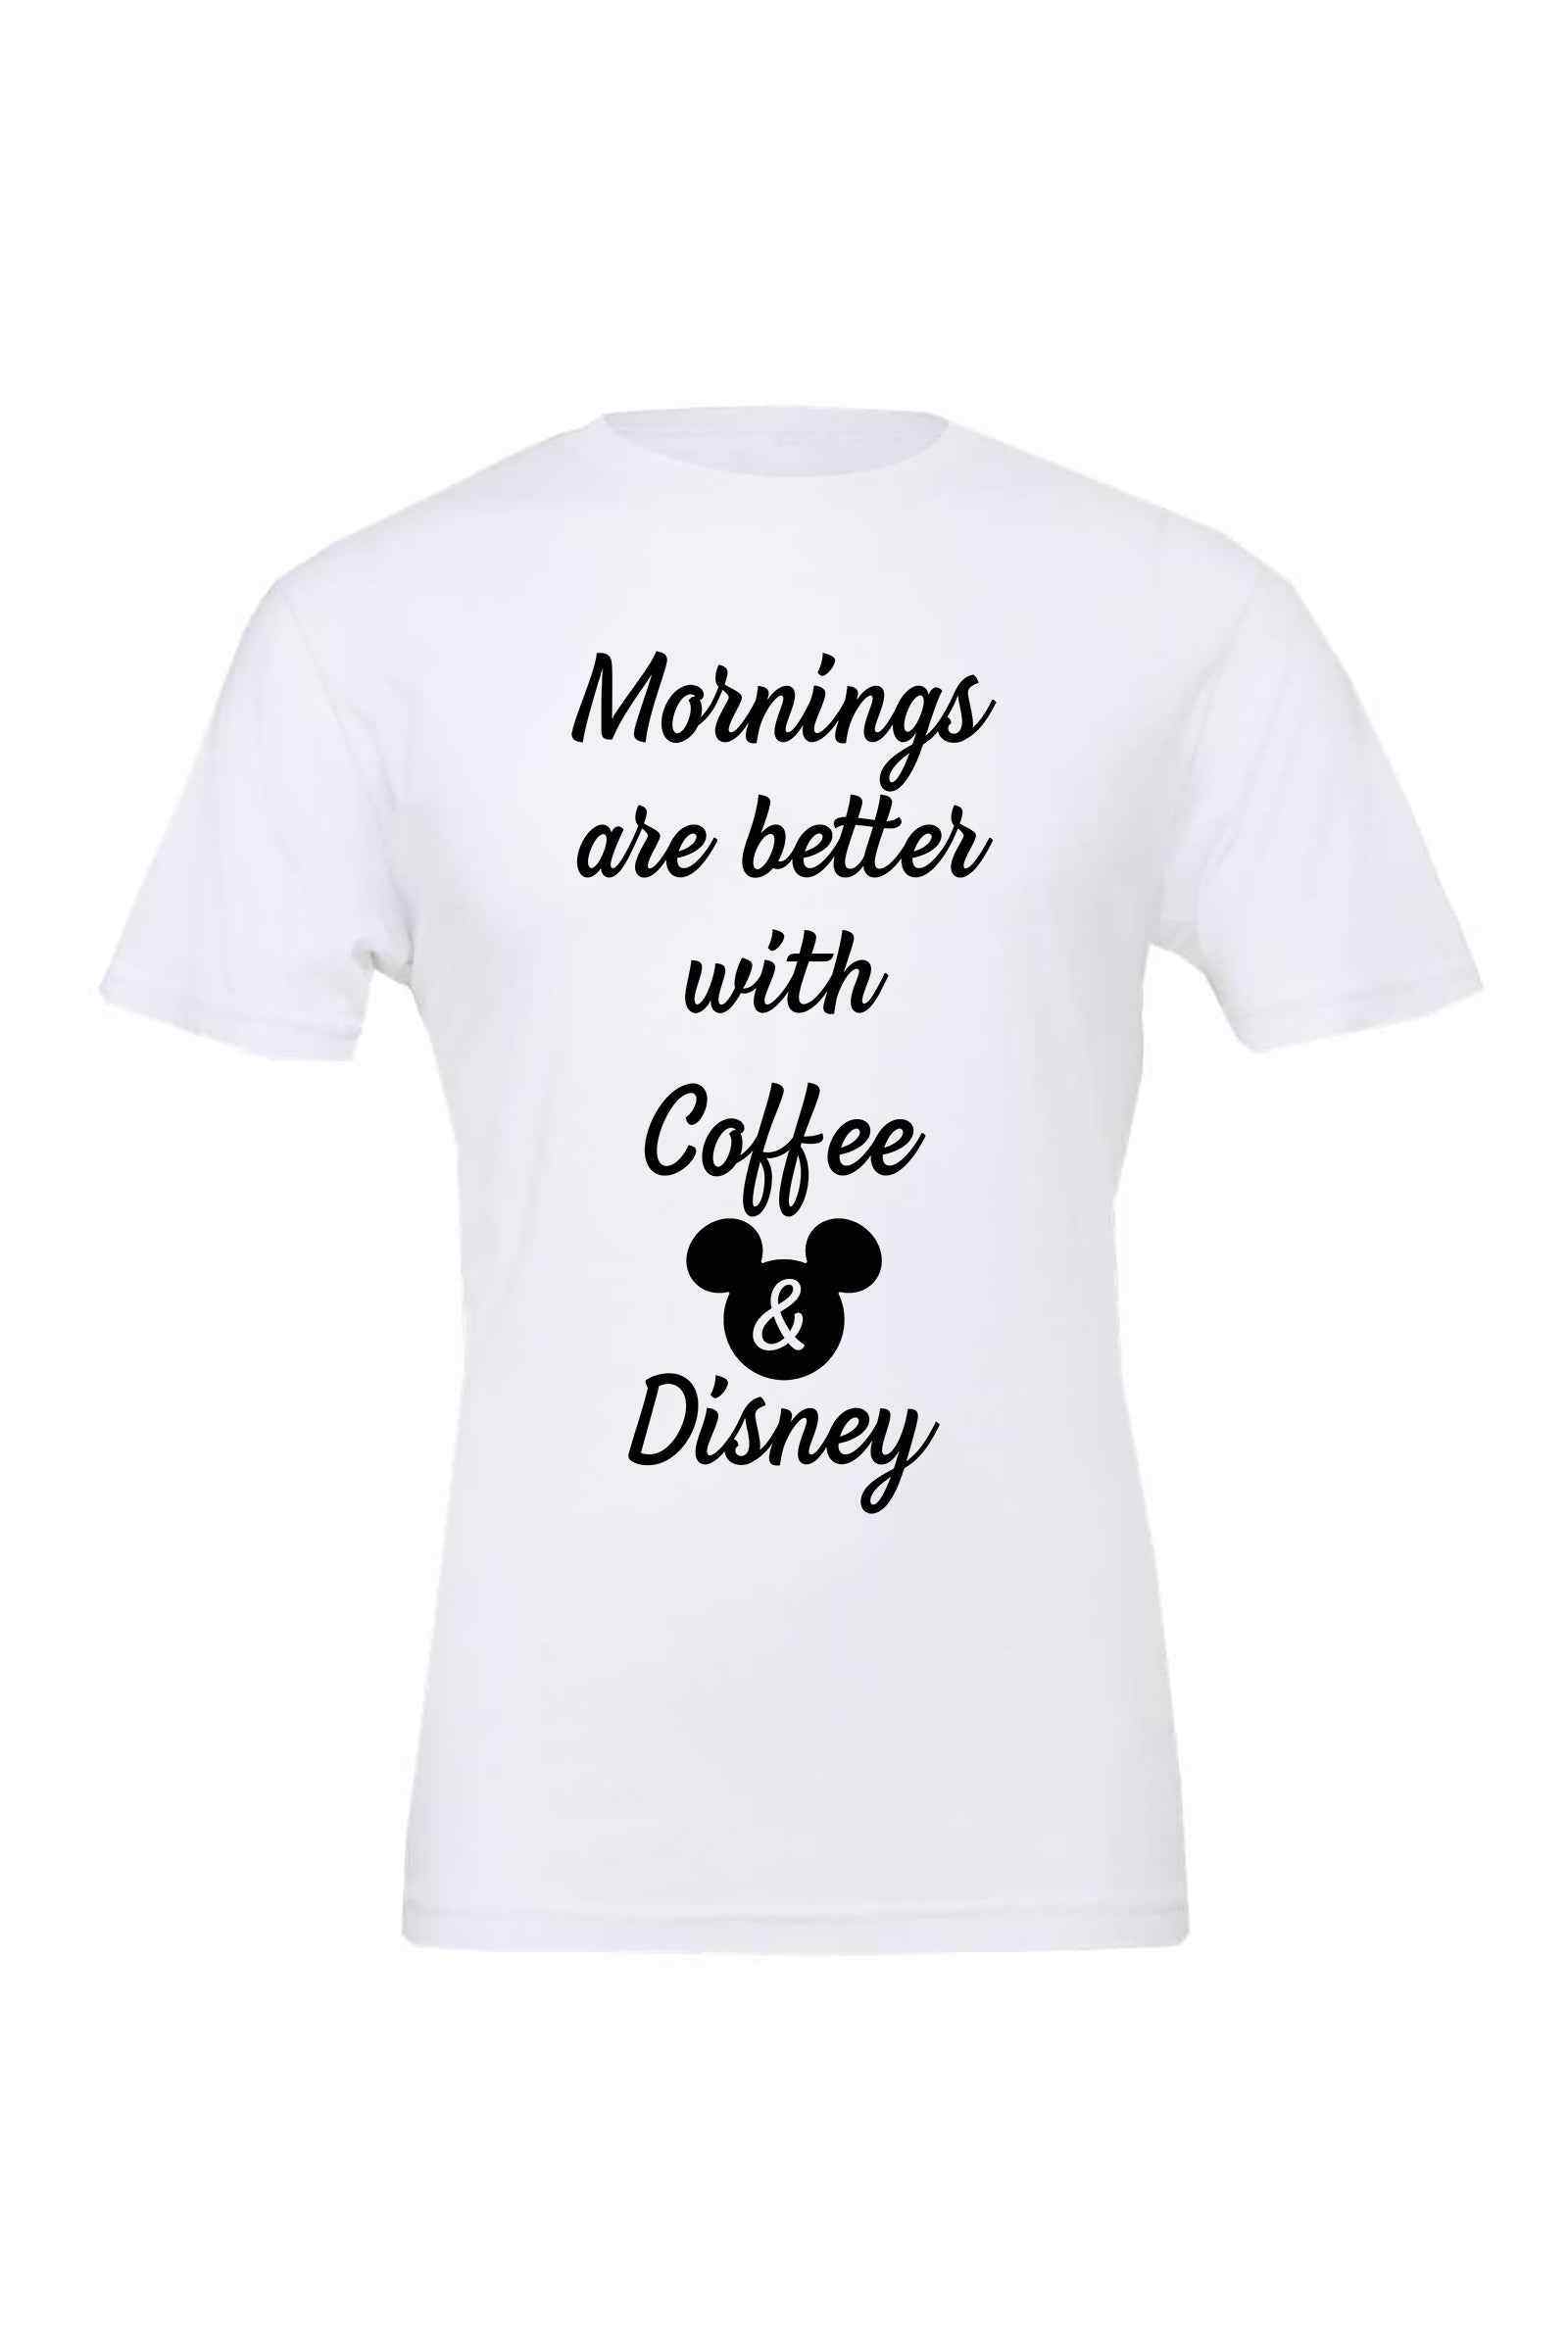 Mornings are better with Coffee and Disney Shirt - Dylan's Tees